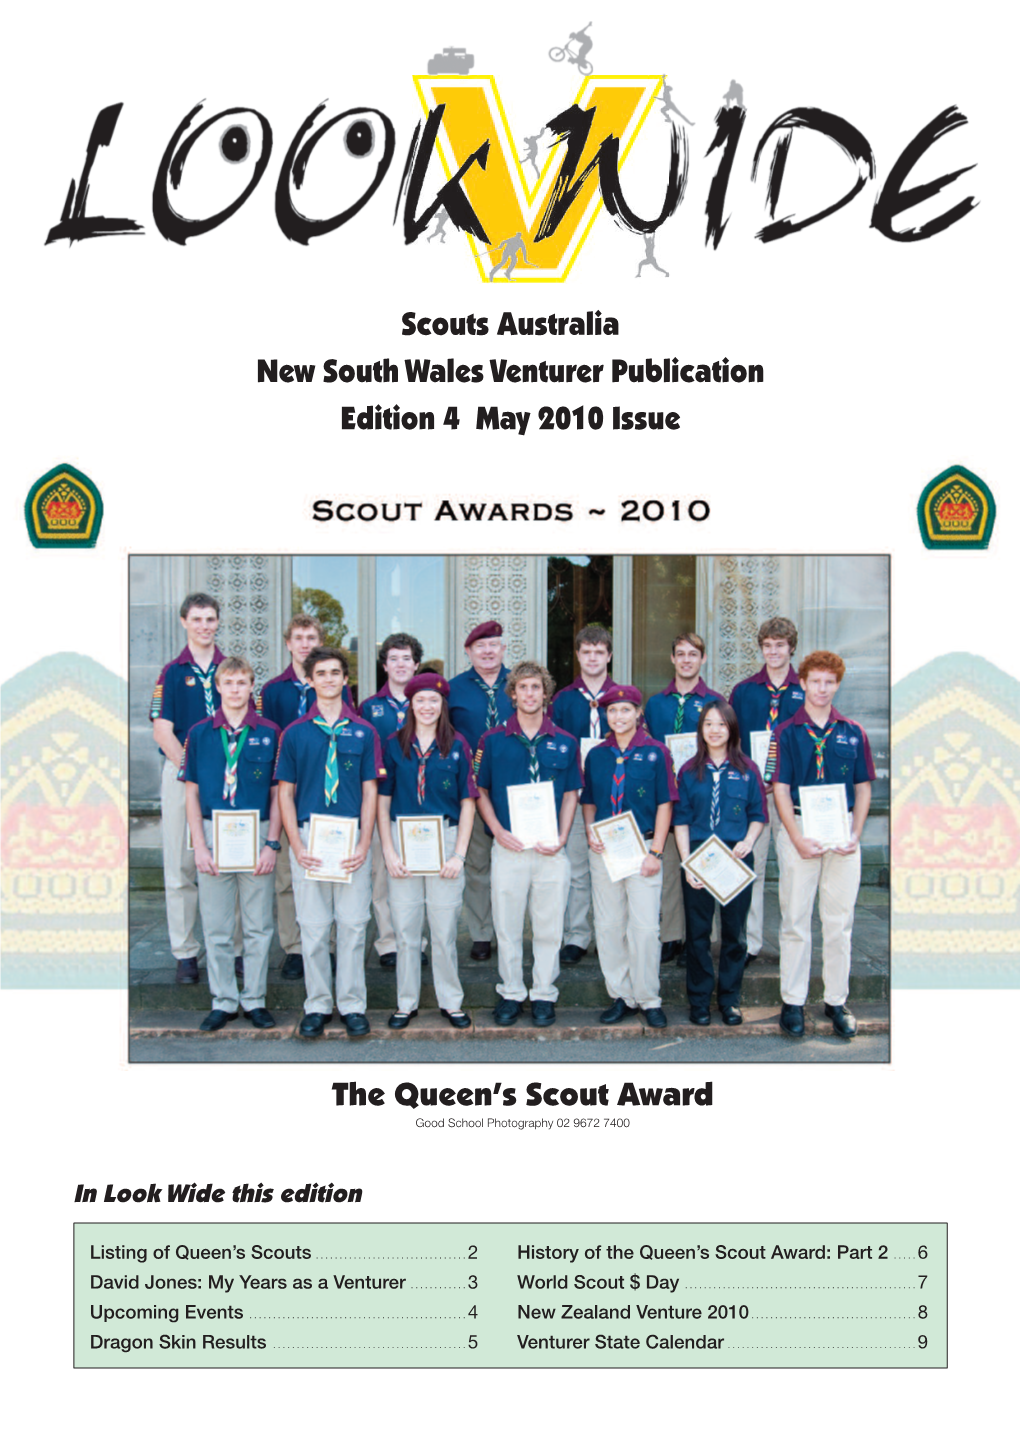 The History of the Queen's Scout Award